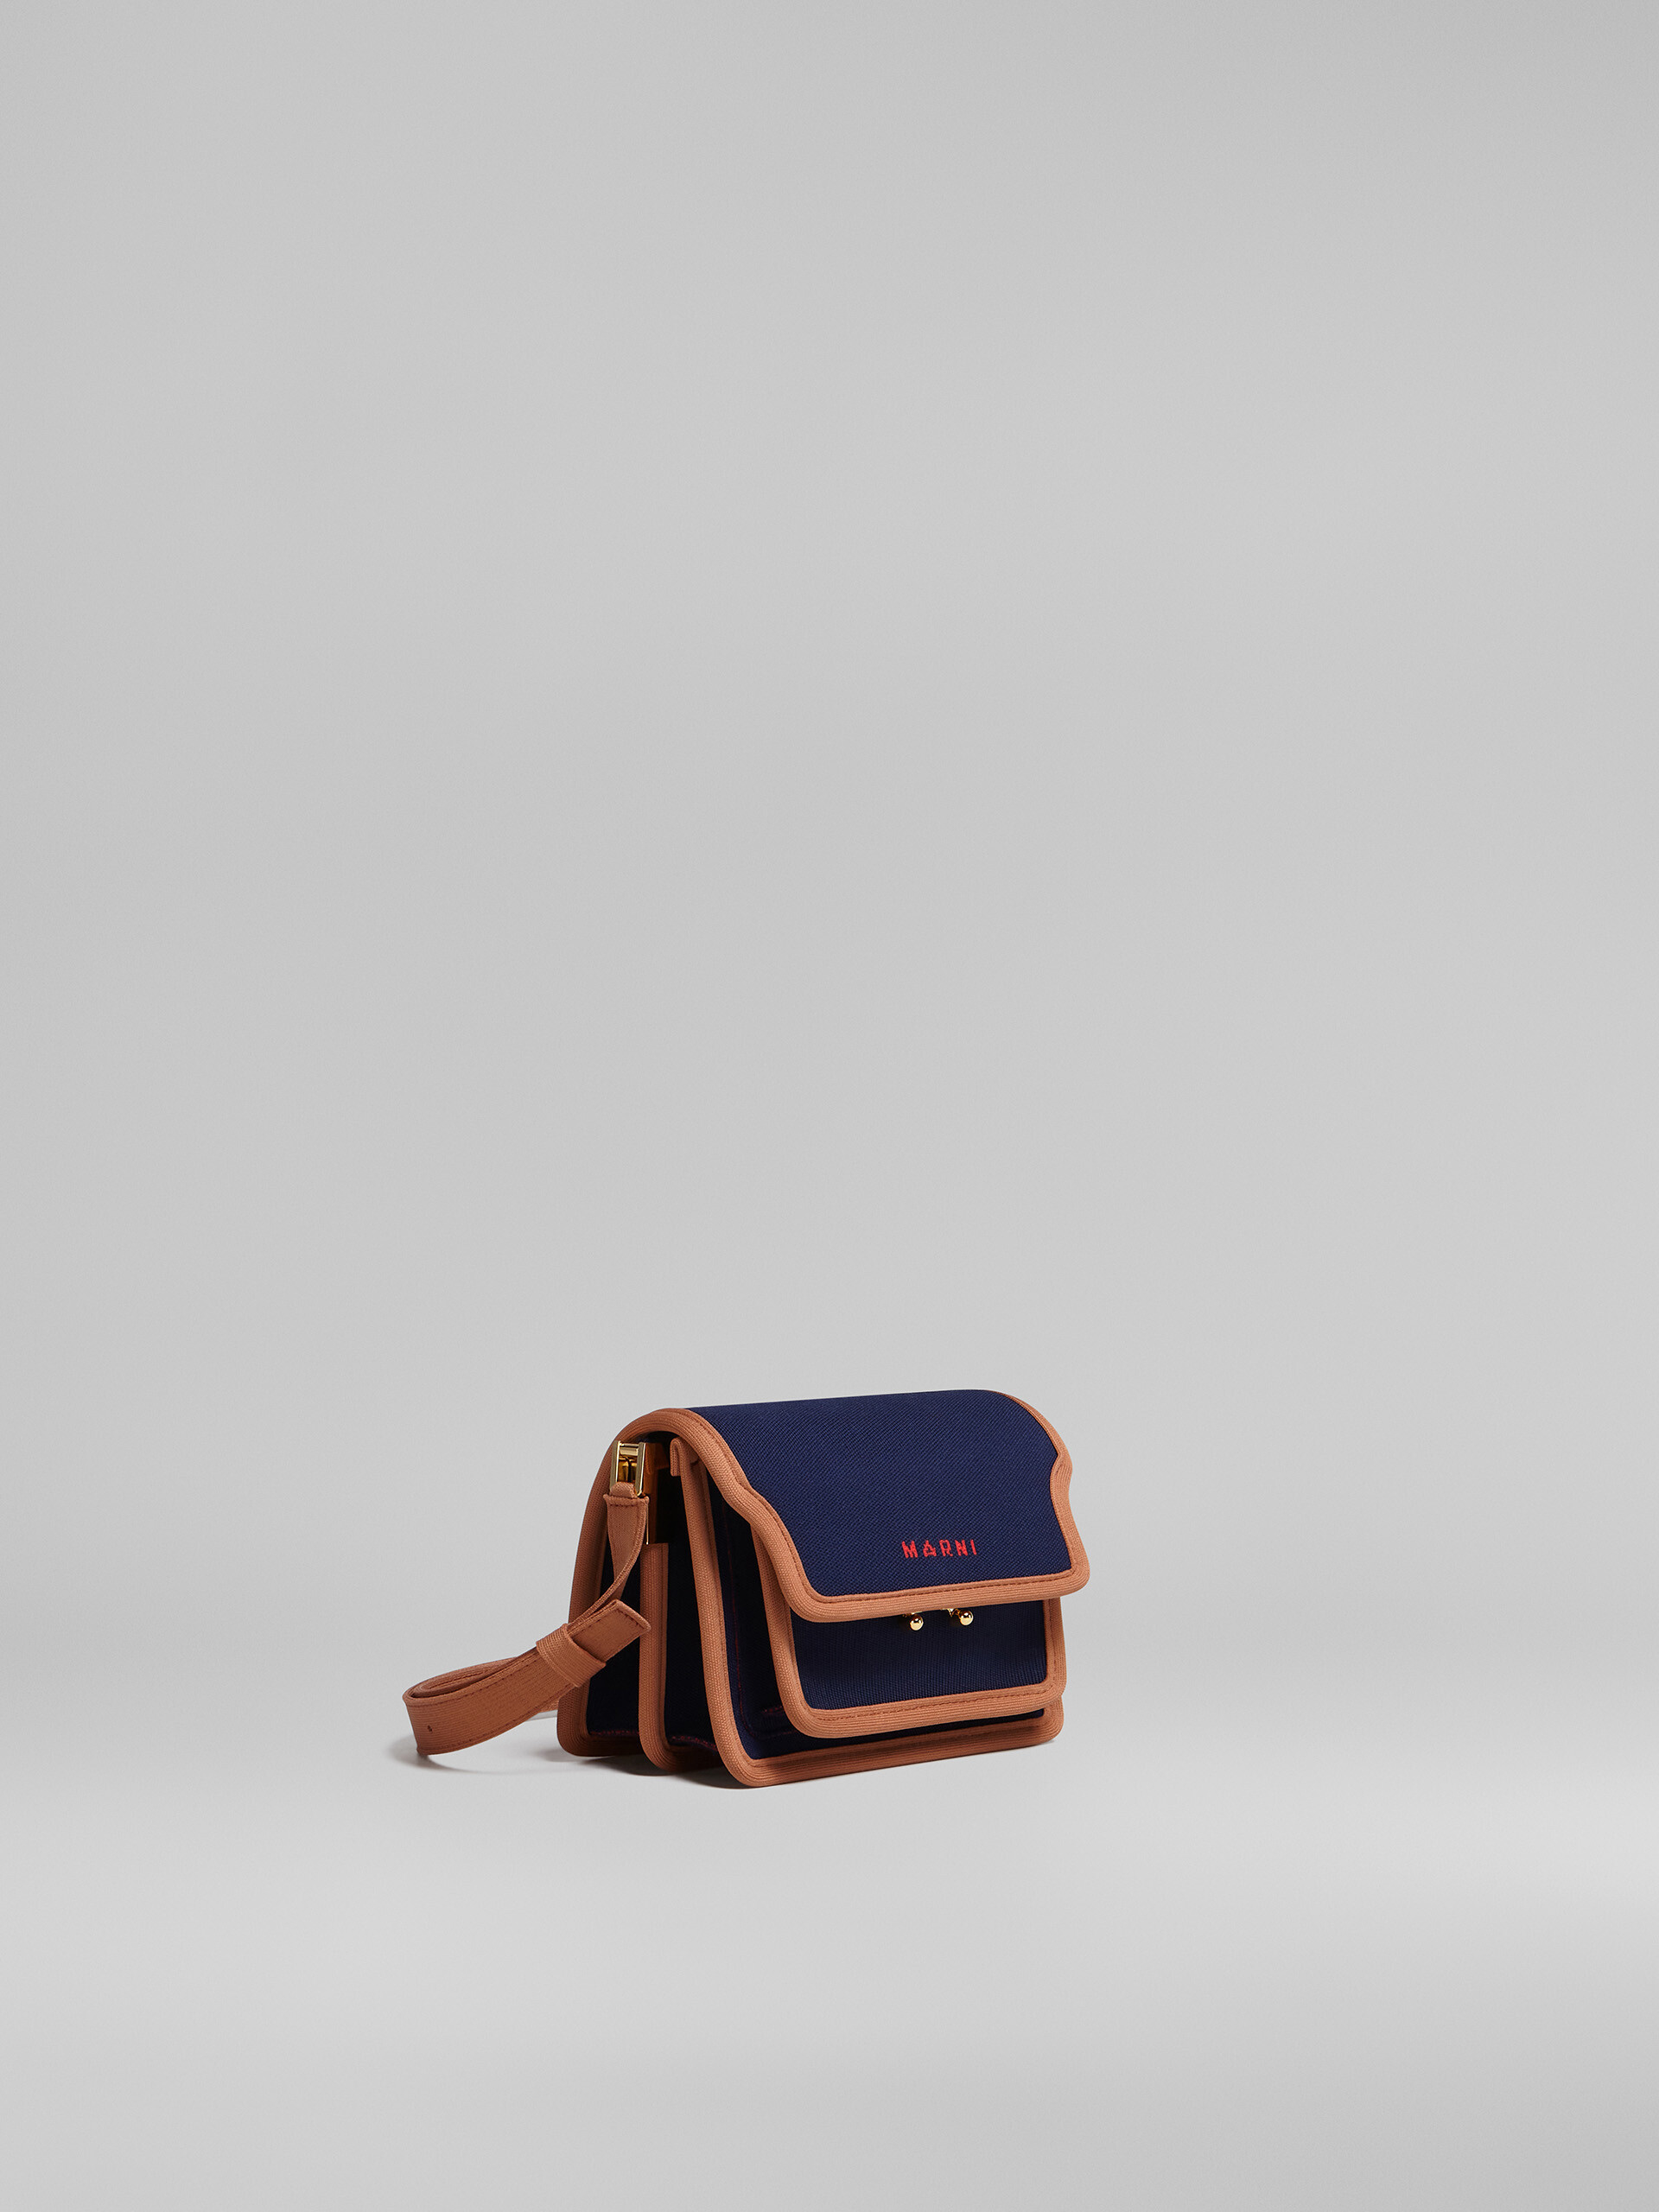 TRUNK SOFT mini bag in blue and brown jacquard - Shoulder Bags - Image 6